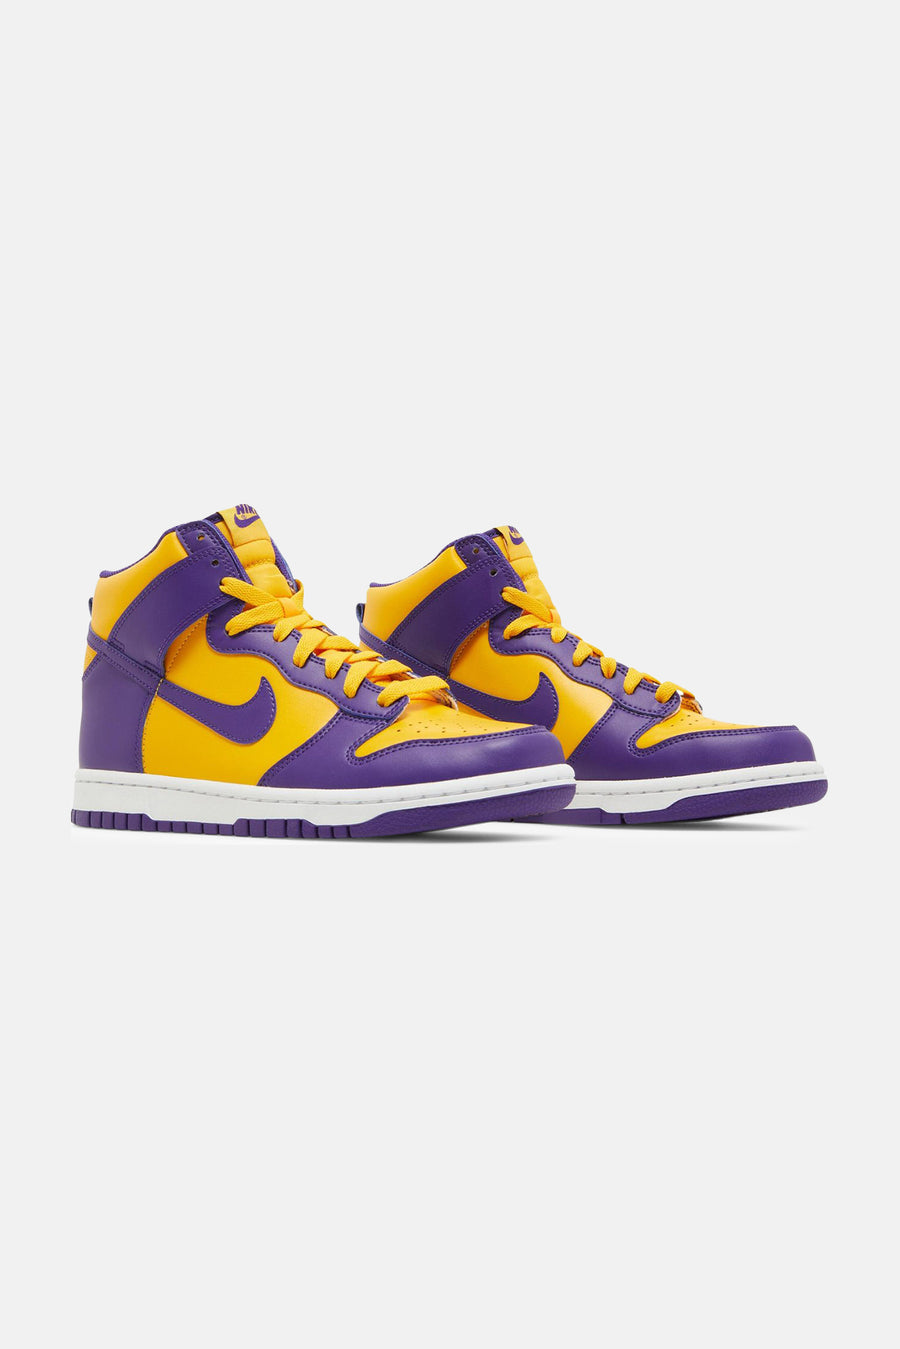 Kid's Dunk High Court Purple "Lakers"